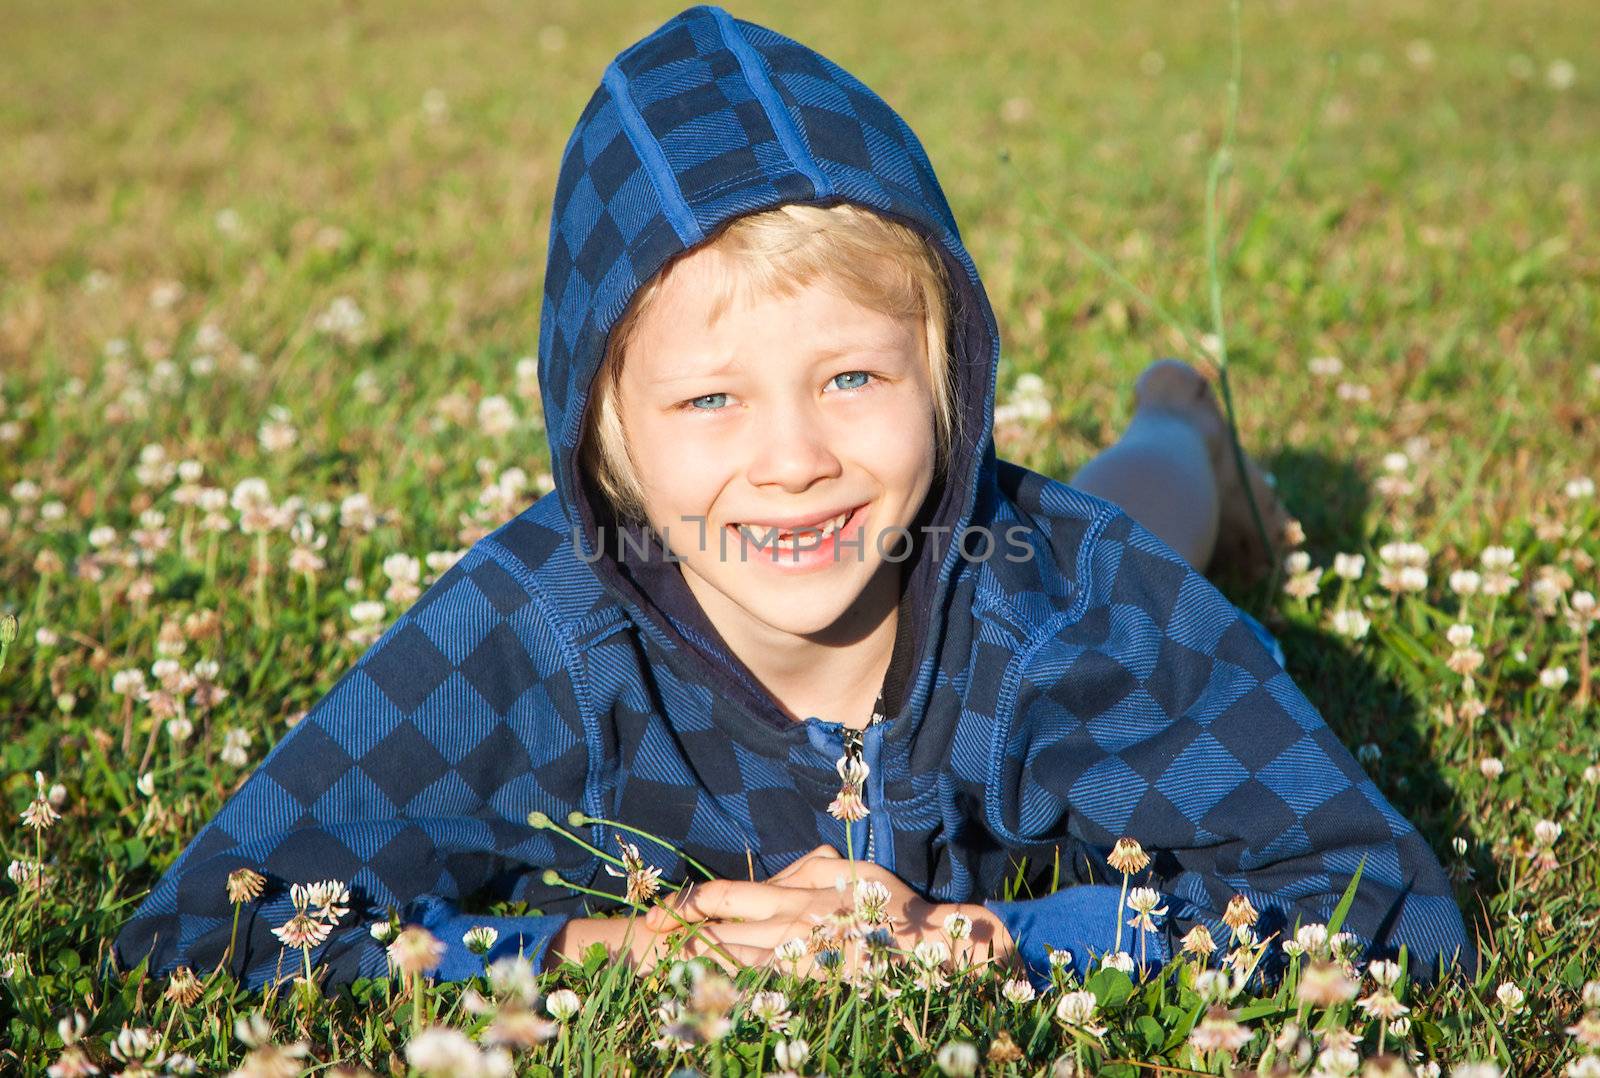 A cute happy smiling young boy with missing front teeth lying in grass with clover.